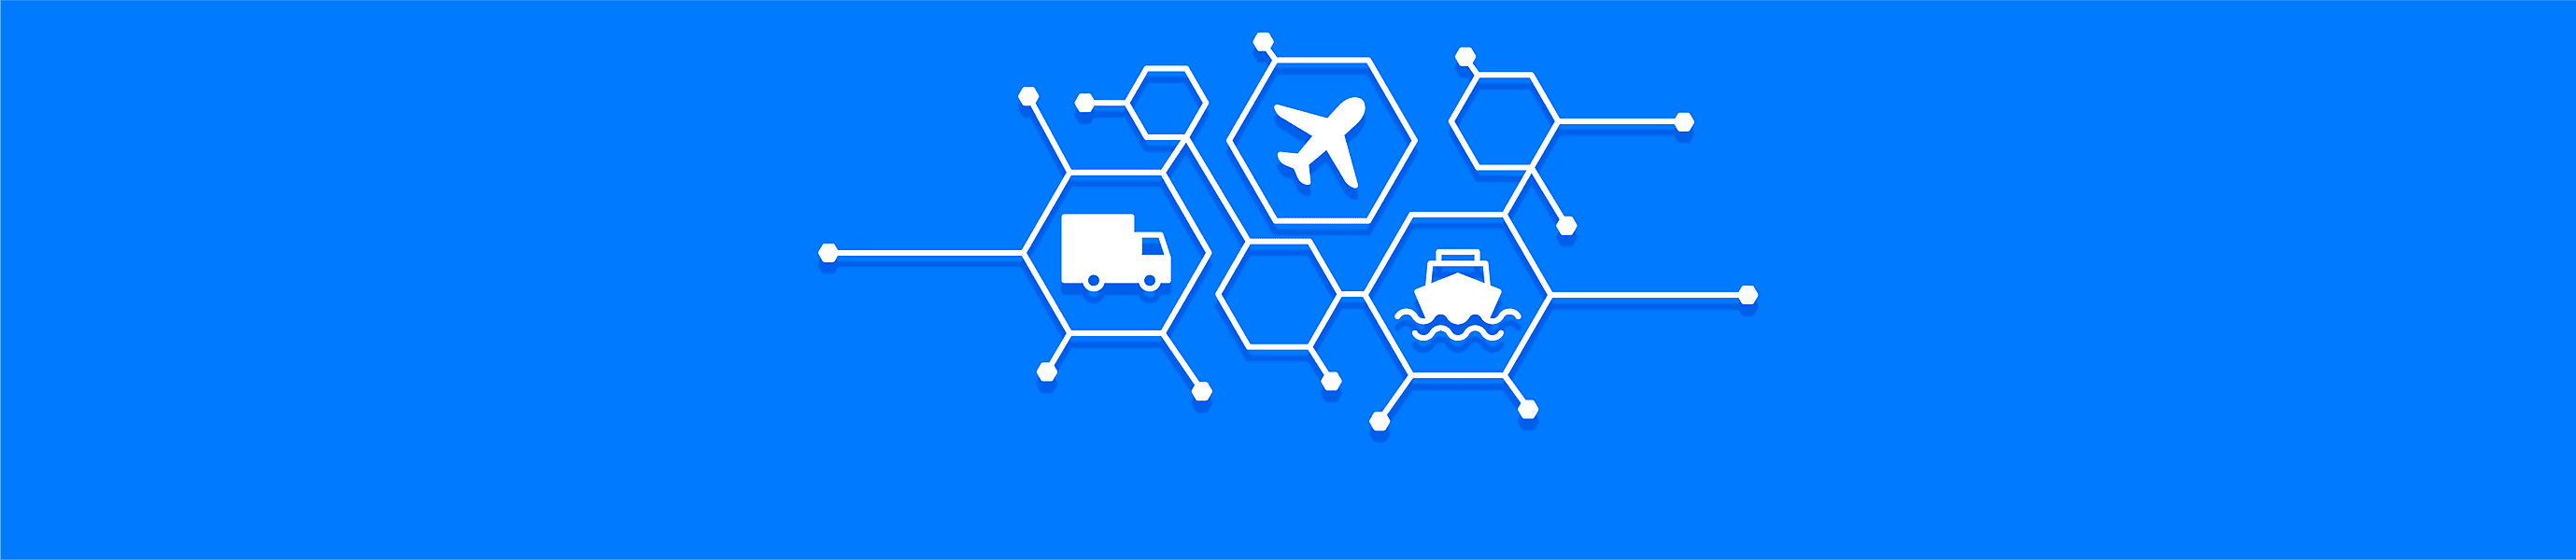 Blockchain In Logistics: How The Blockchain Technologies Are Changing The Transportation Industry